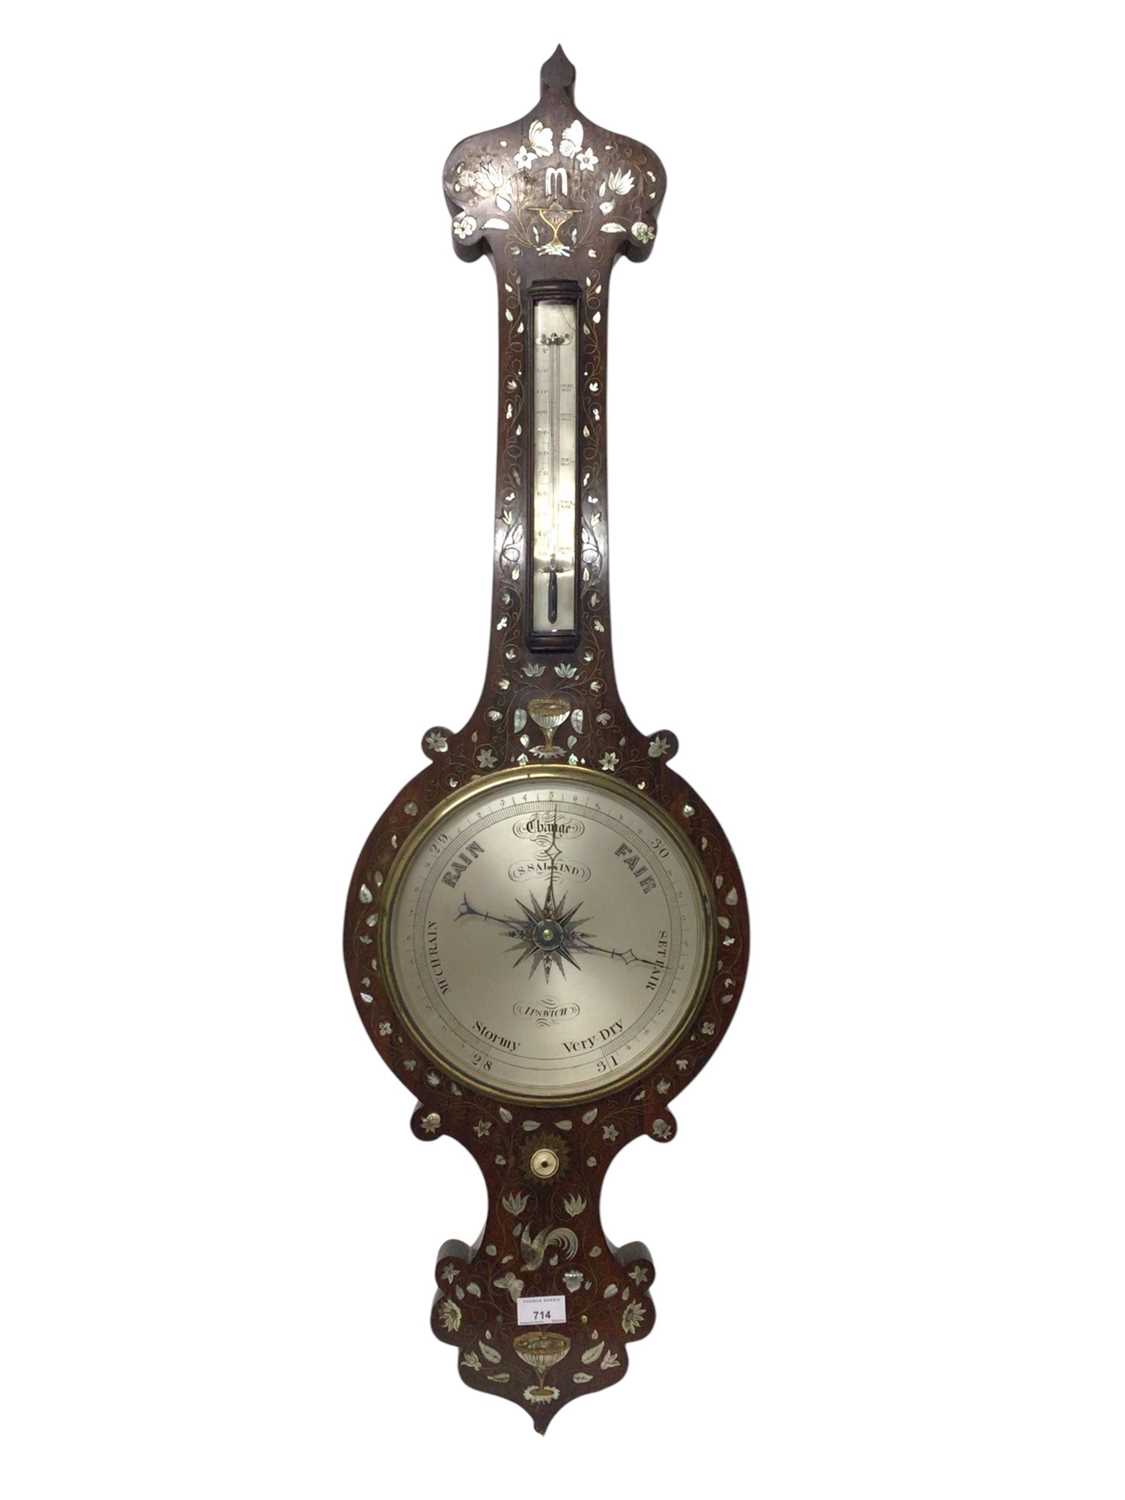 Early Victorian rosewood and mother of pearl inlaid barometer, signed S. Salkind, Ipswich